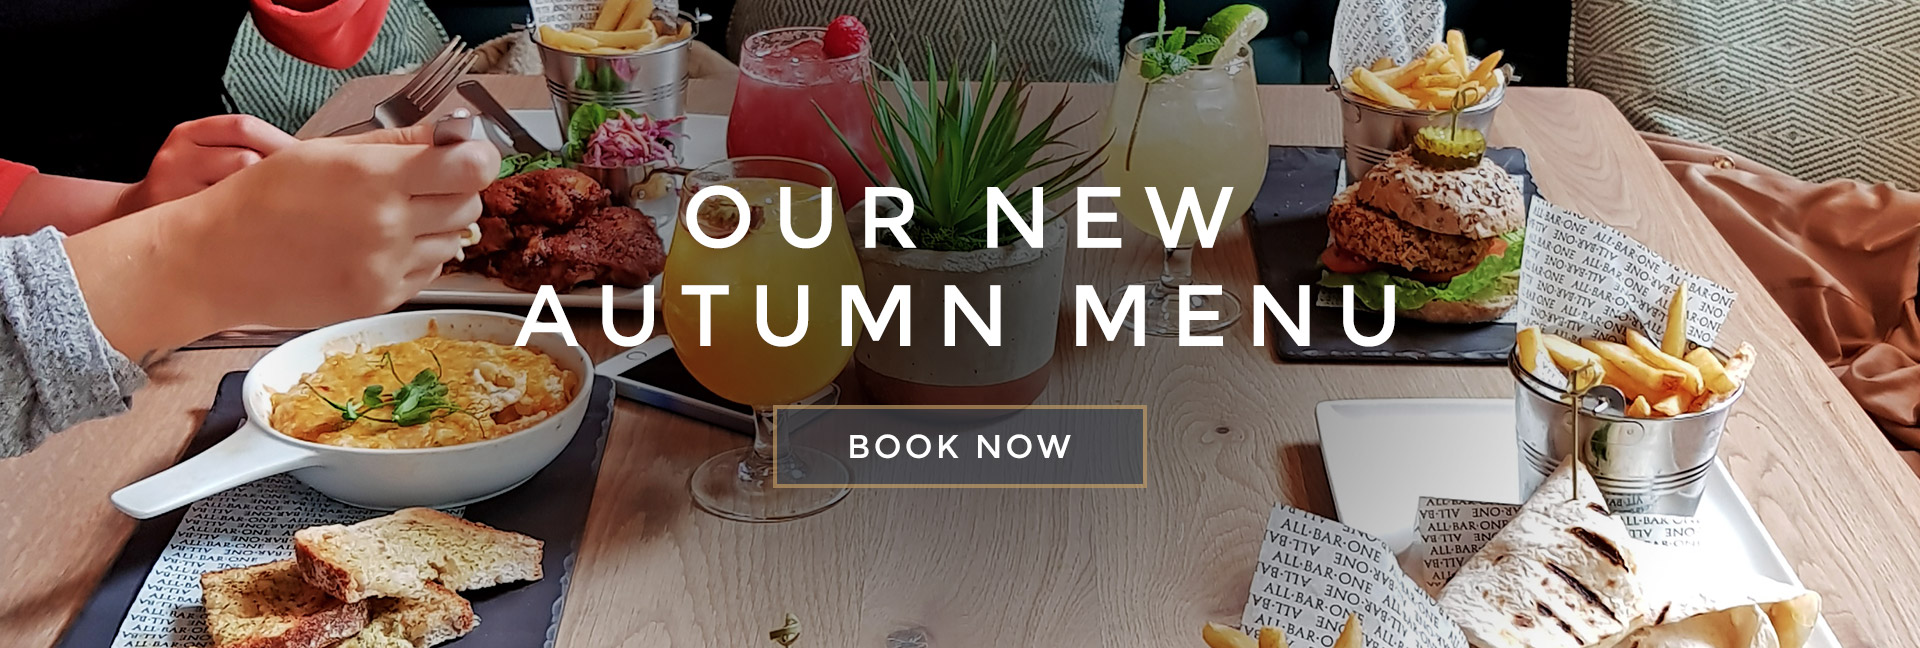 Our new Autumn menu at All Bar One Harrogate - Book now